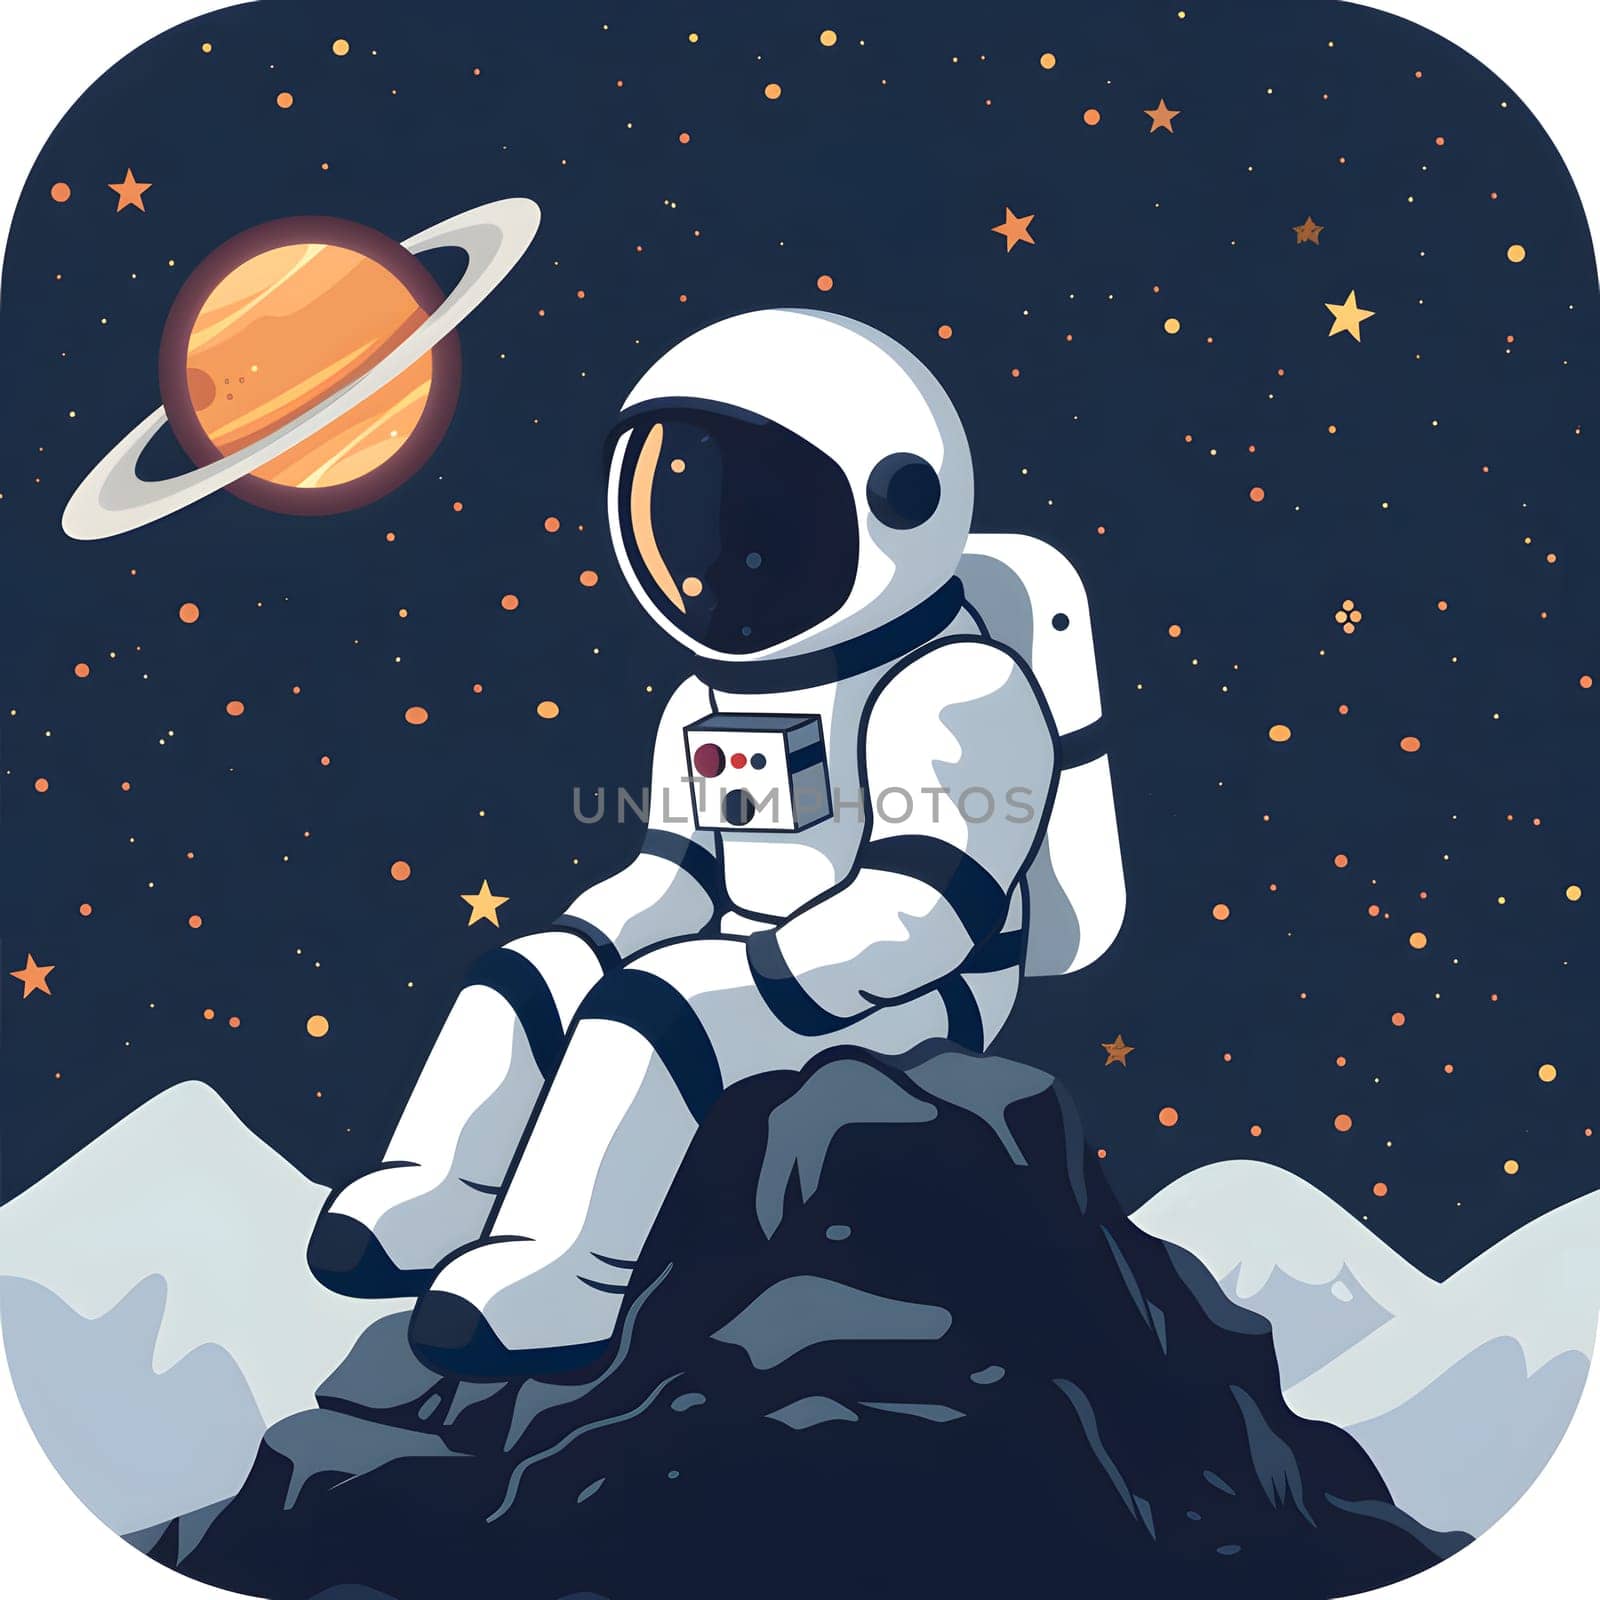 Astronaut seated on rock, planet in background, space art by Nadtochiy